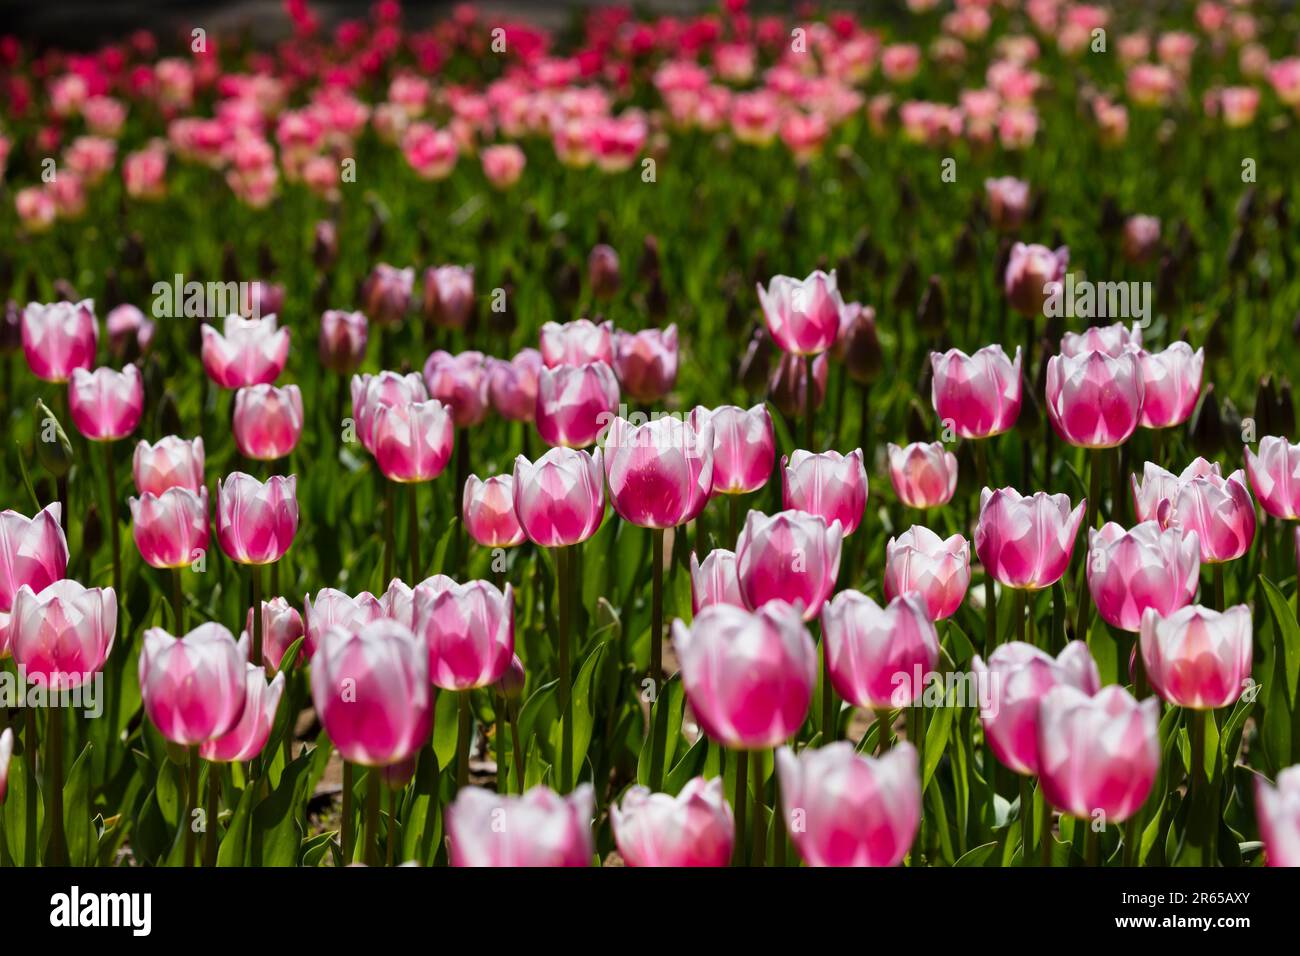 Red And White Tulip Flowers Stock Photo